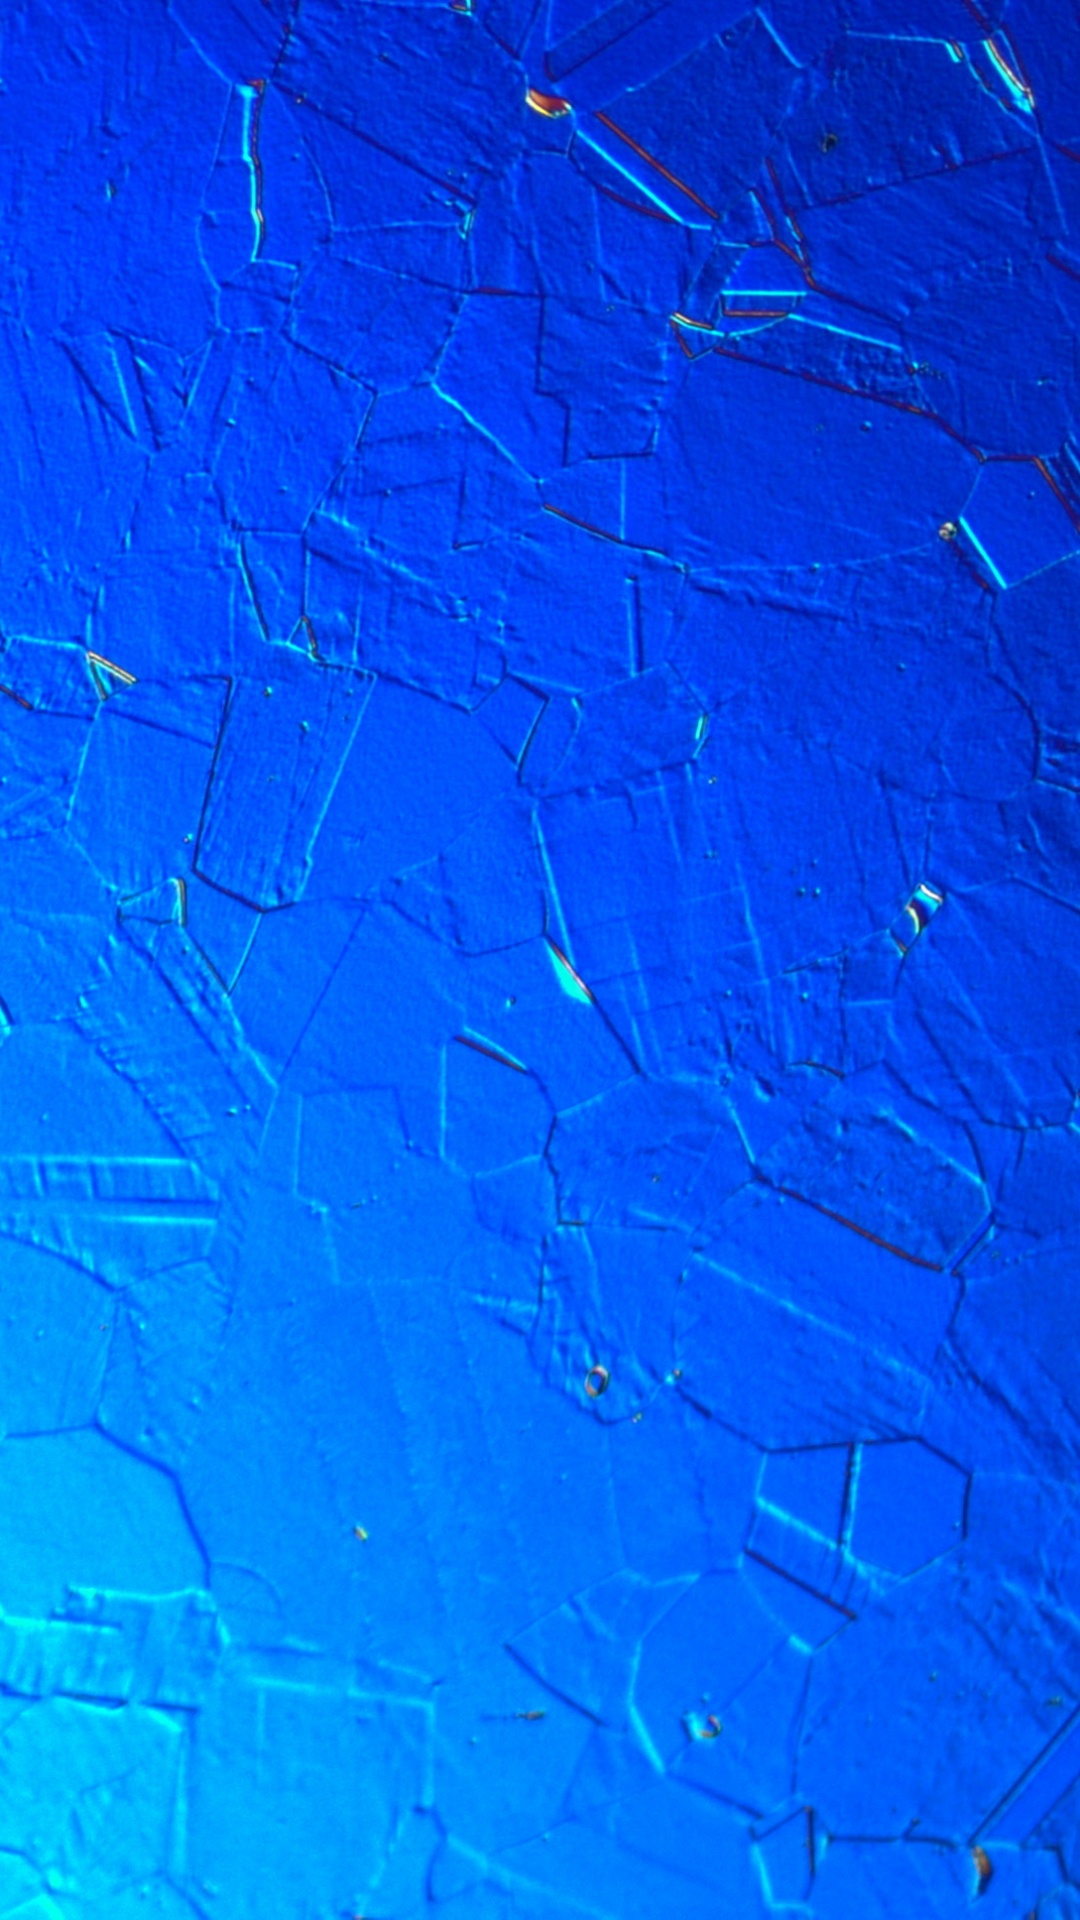 Blue and White Painted Wall. Wallpaper in 1080x1920 Resolution